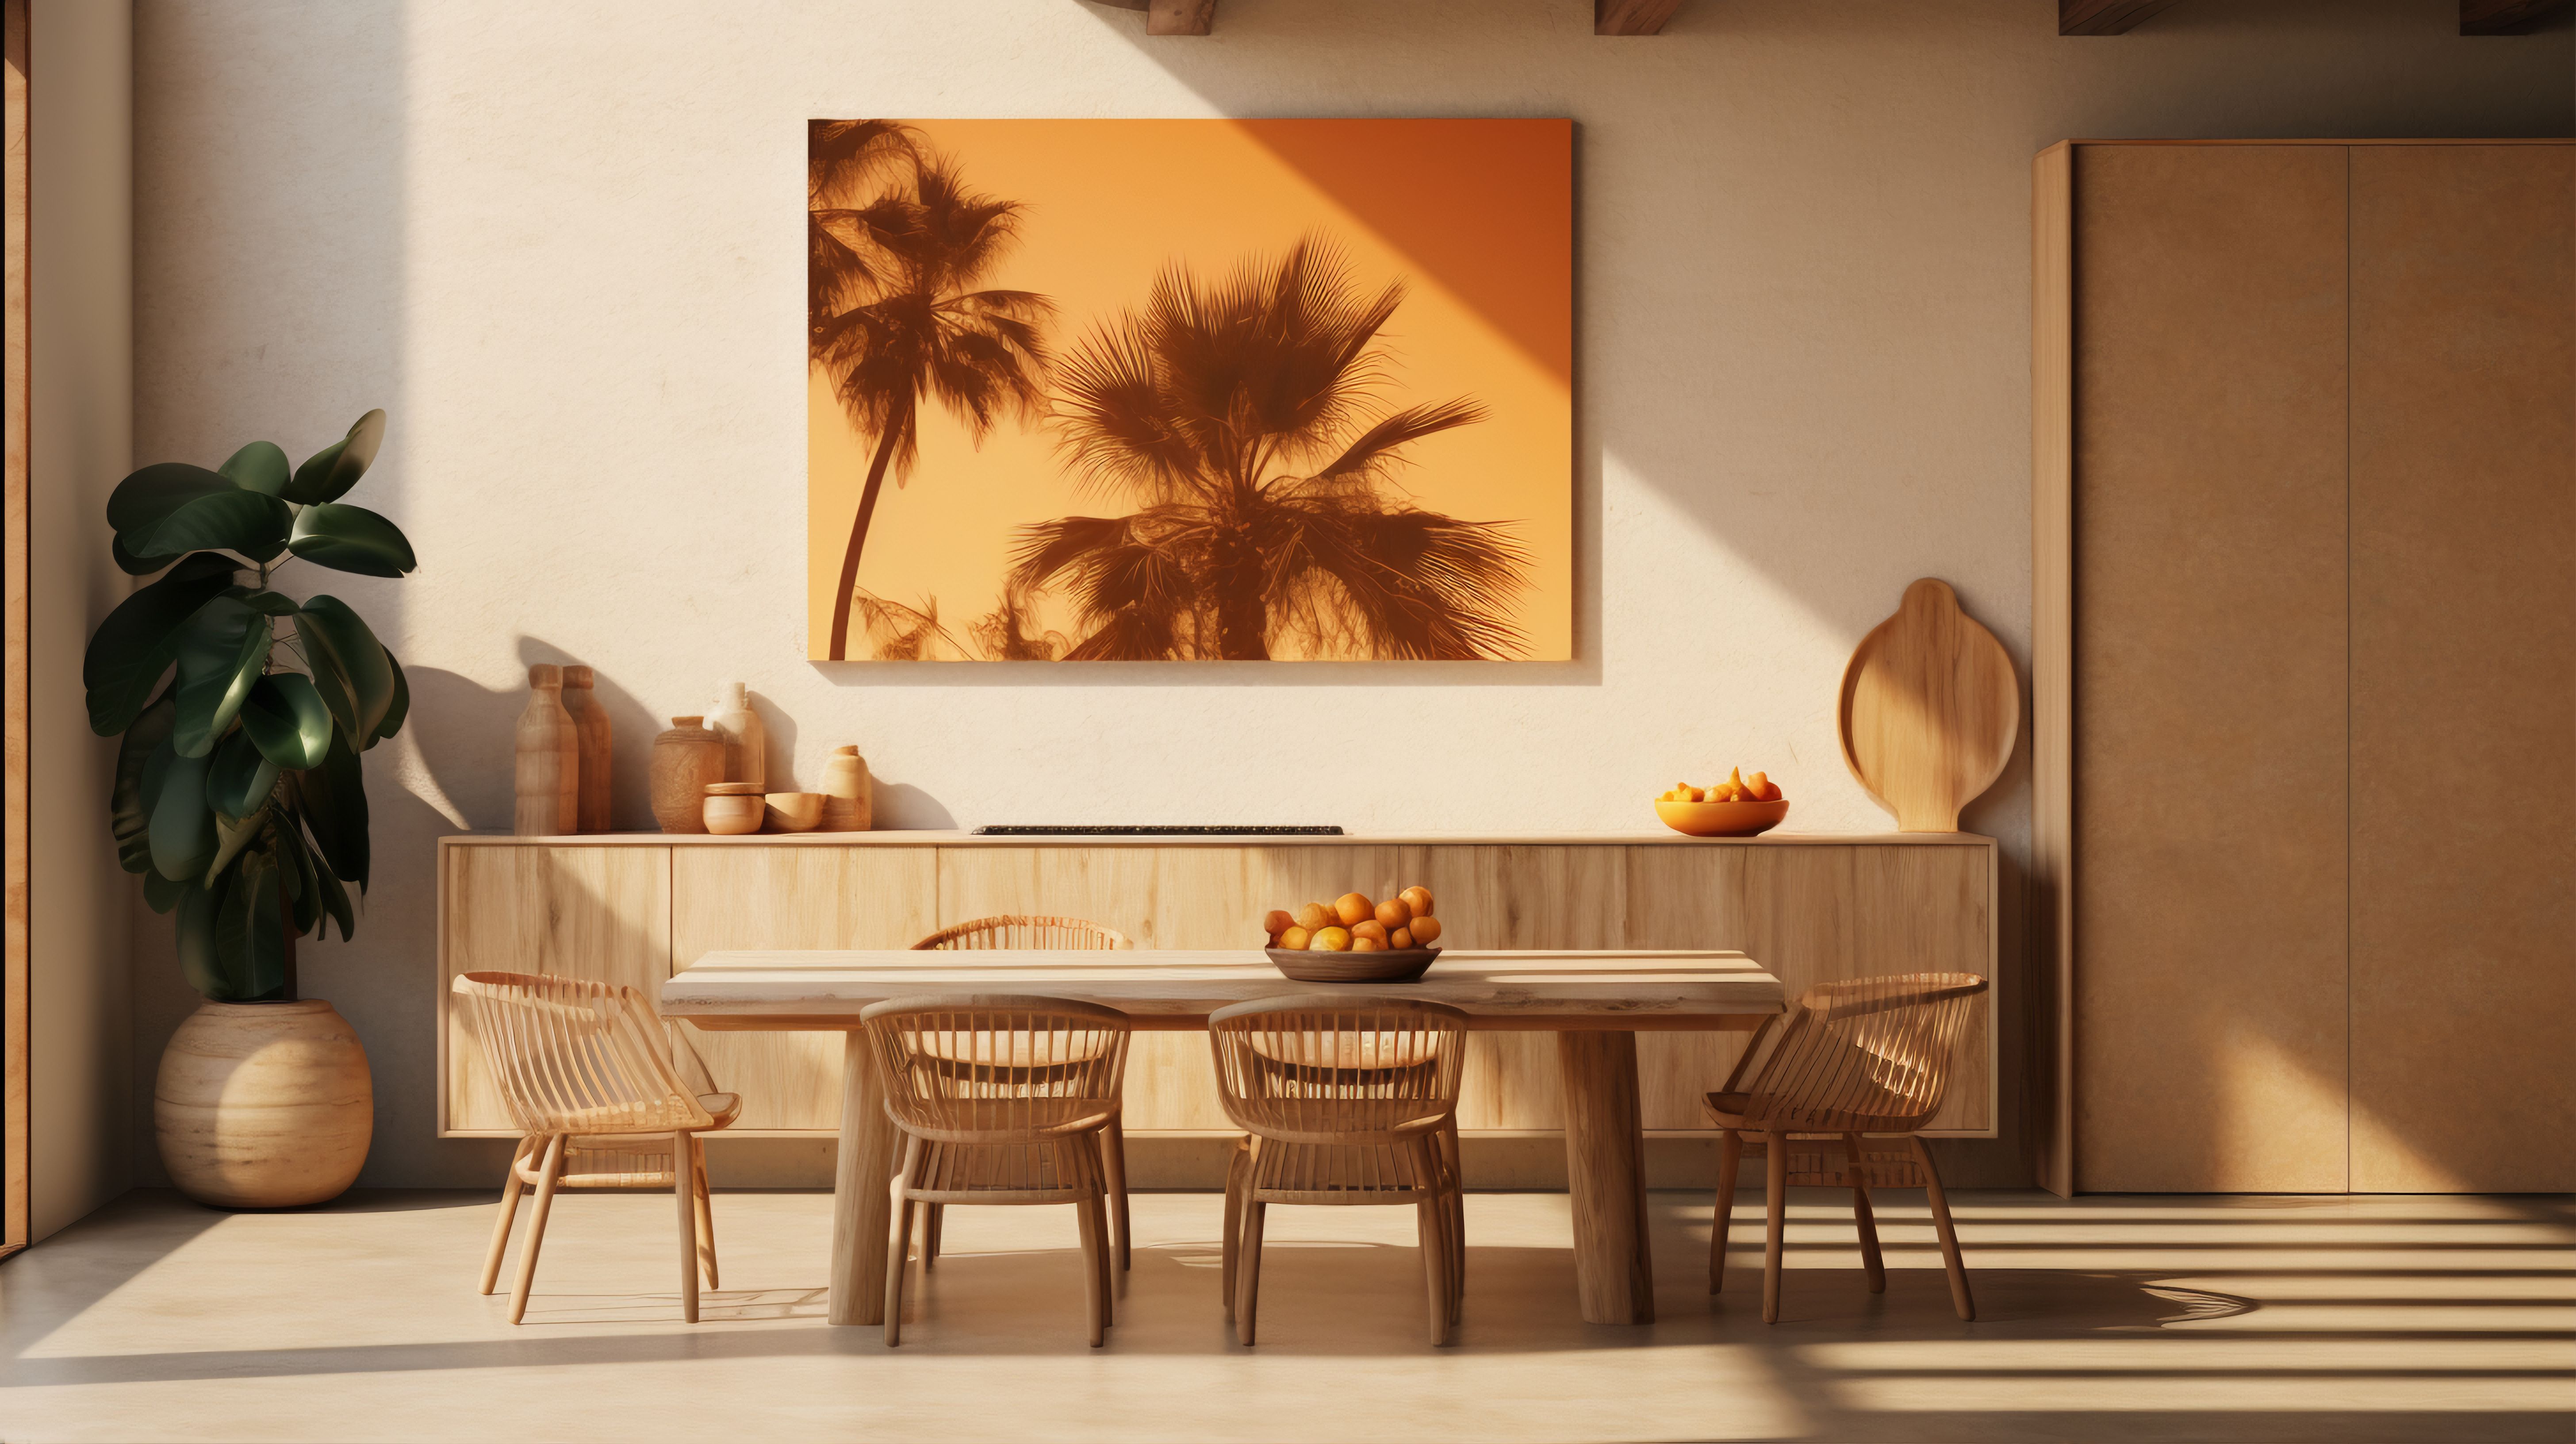 mid-century furnished dining room with palm tree picture behind teak chairs and dining table, with a ficus plant in the corner and a long credenza